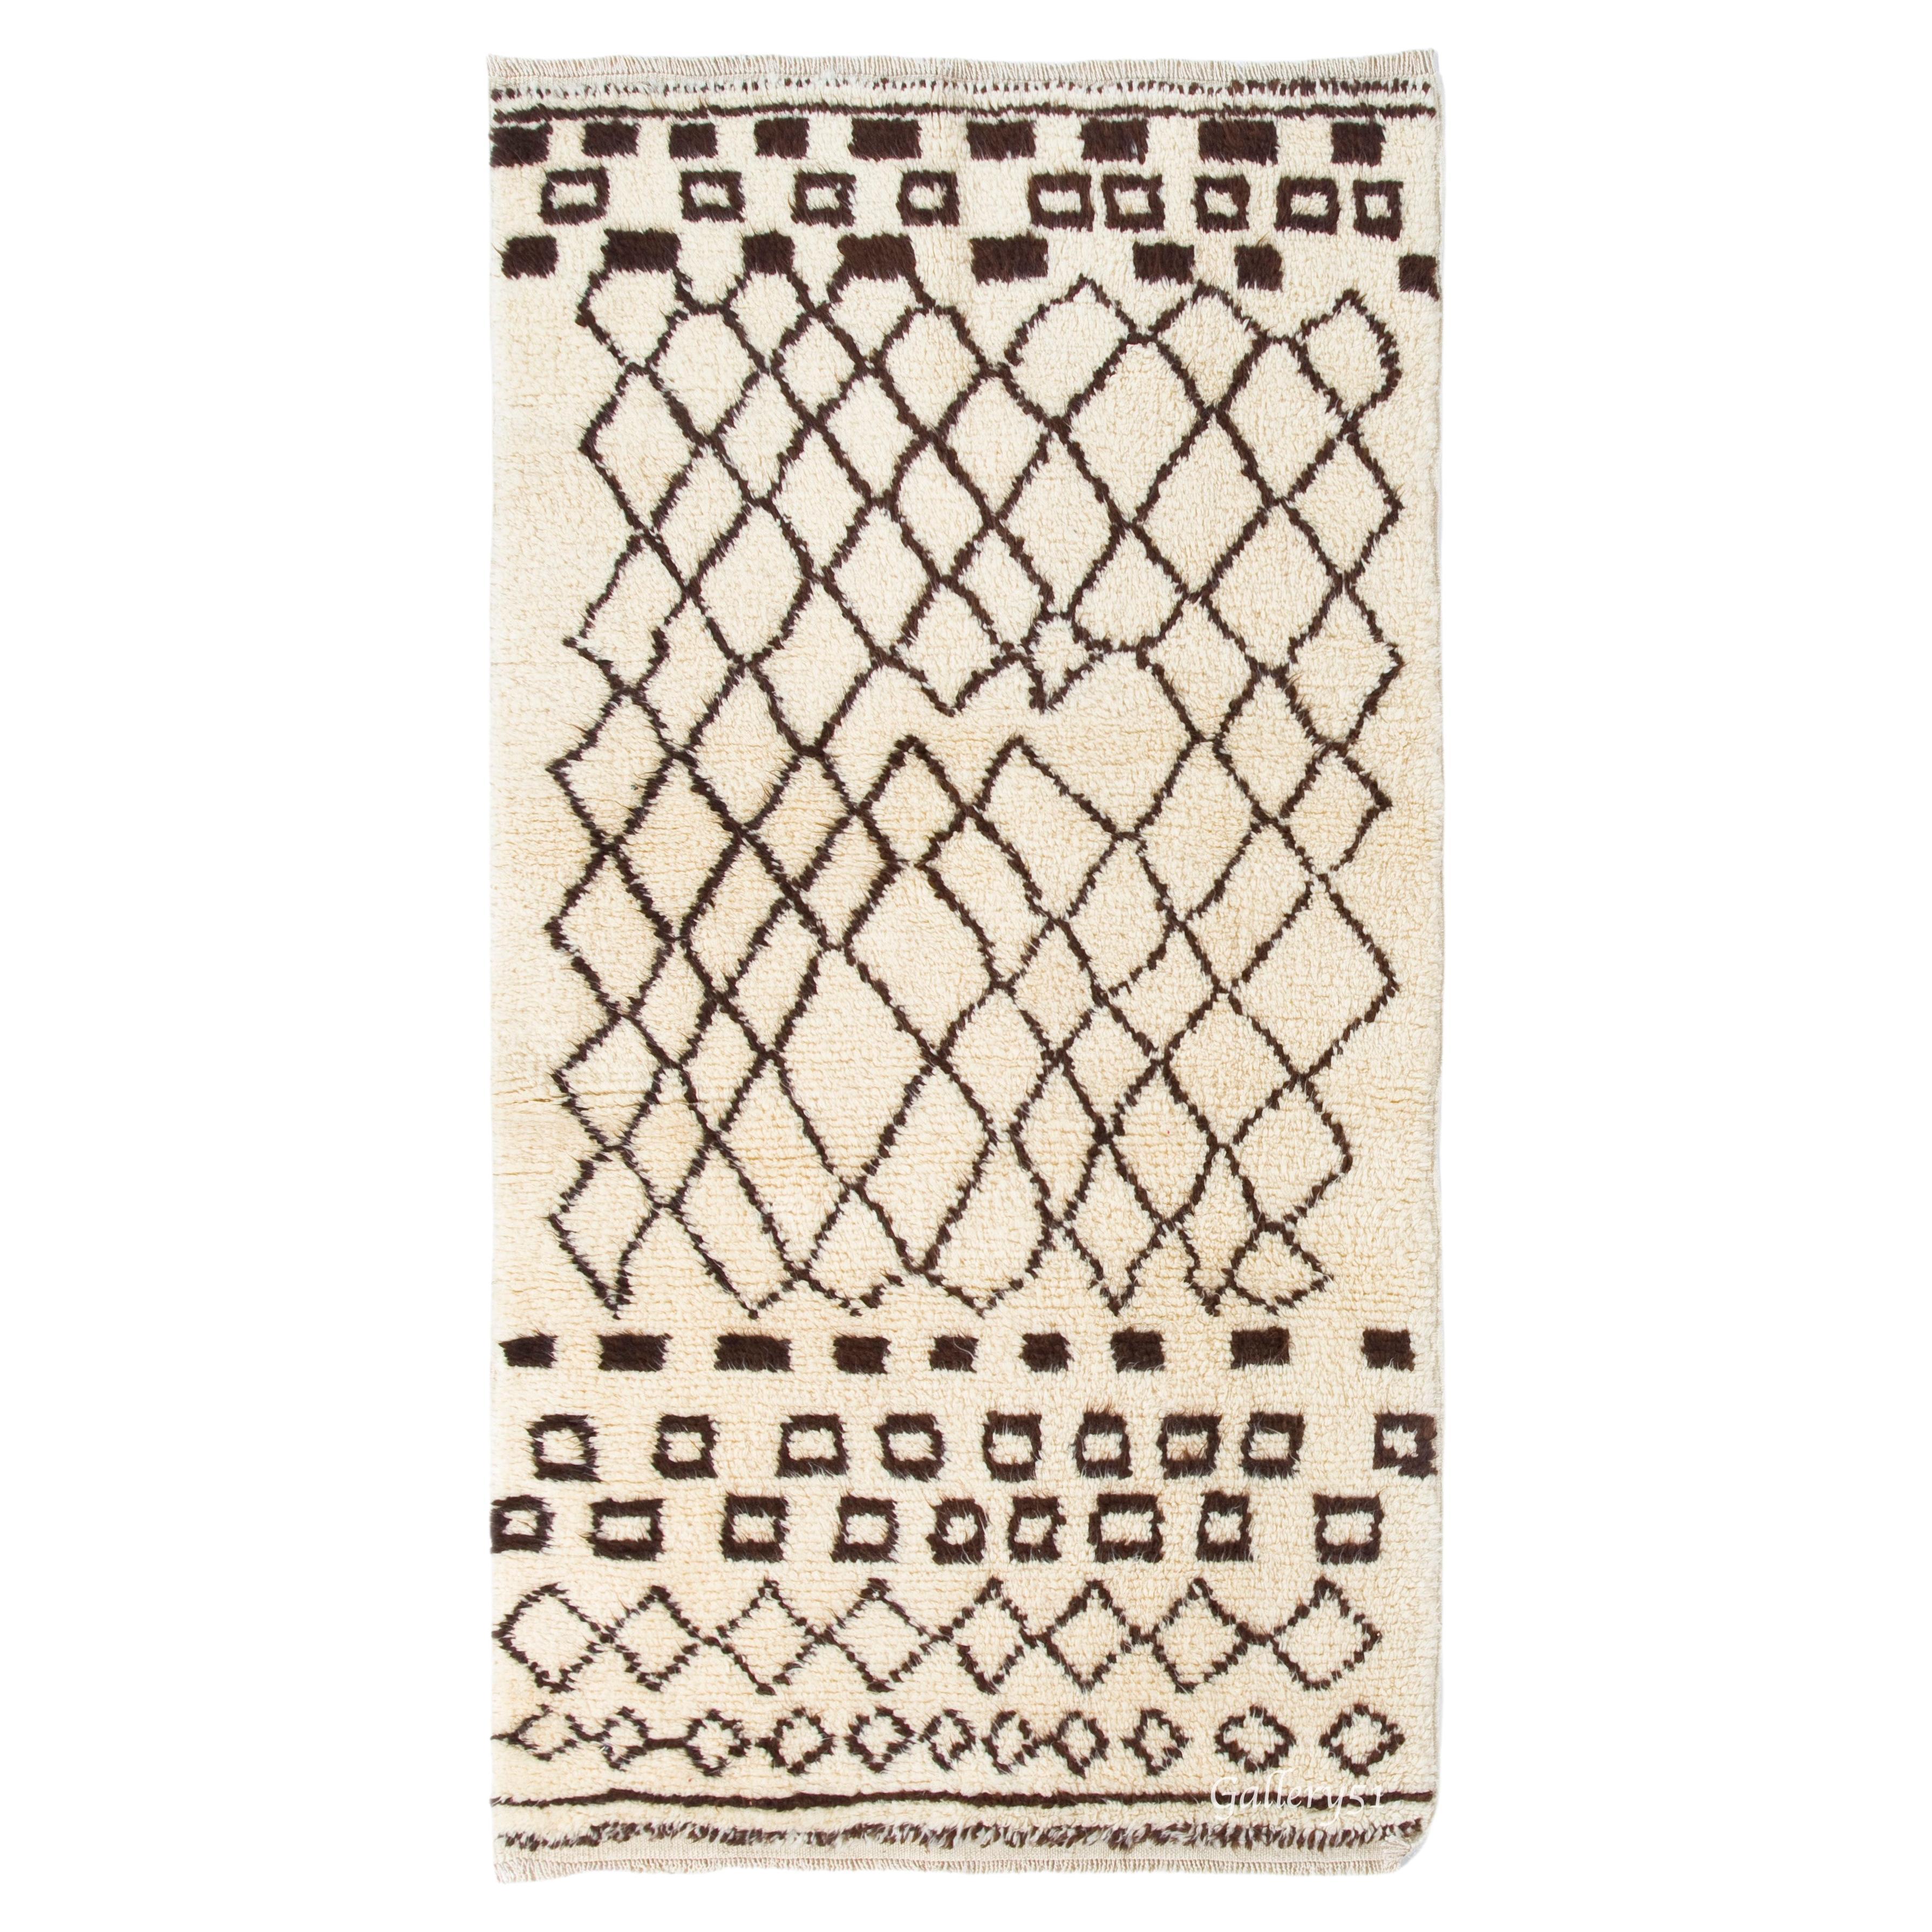 4x7 ft Contemporary Hand-Knotted Moroccan Tulu Rug Made of Natural Undyed Wool